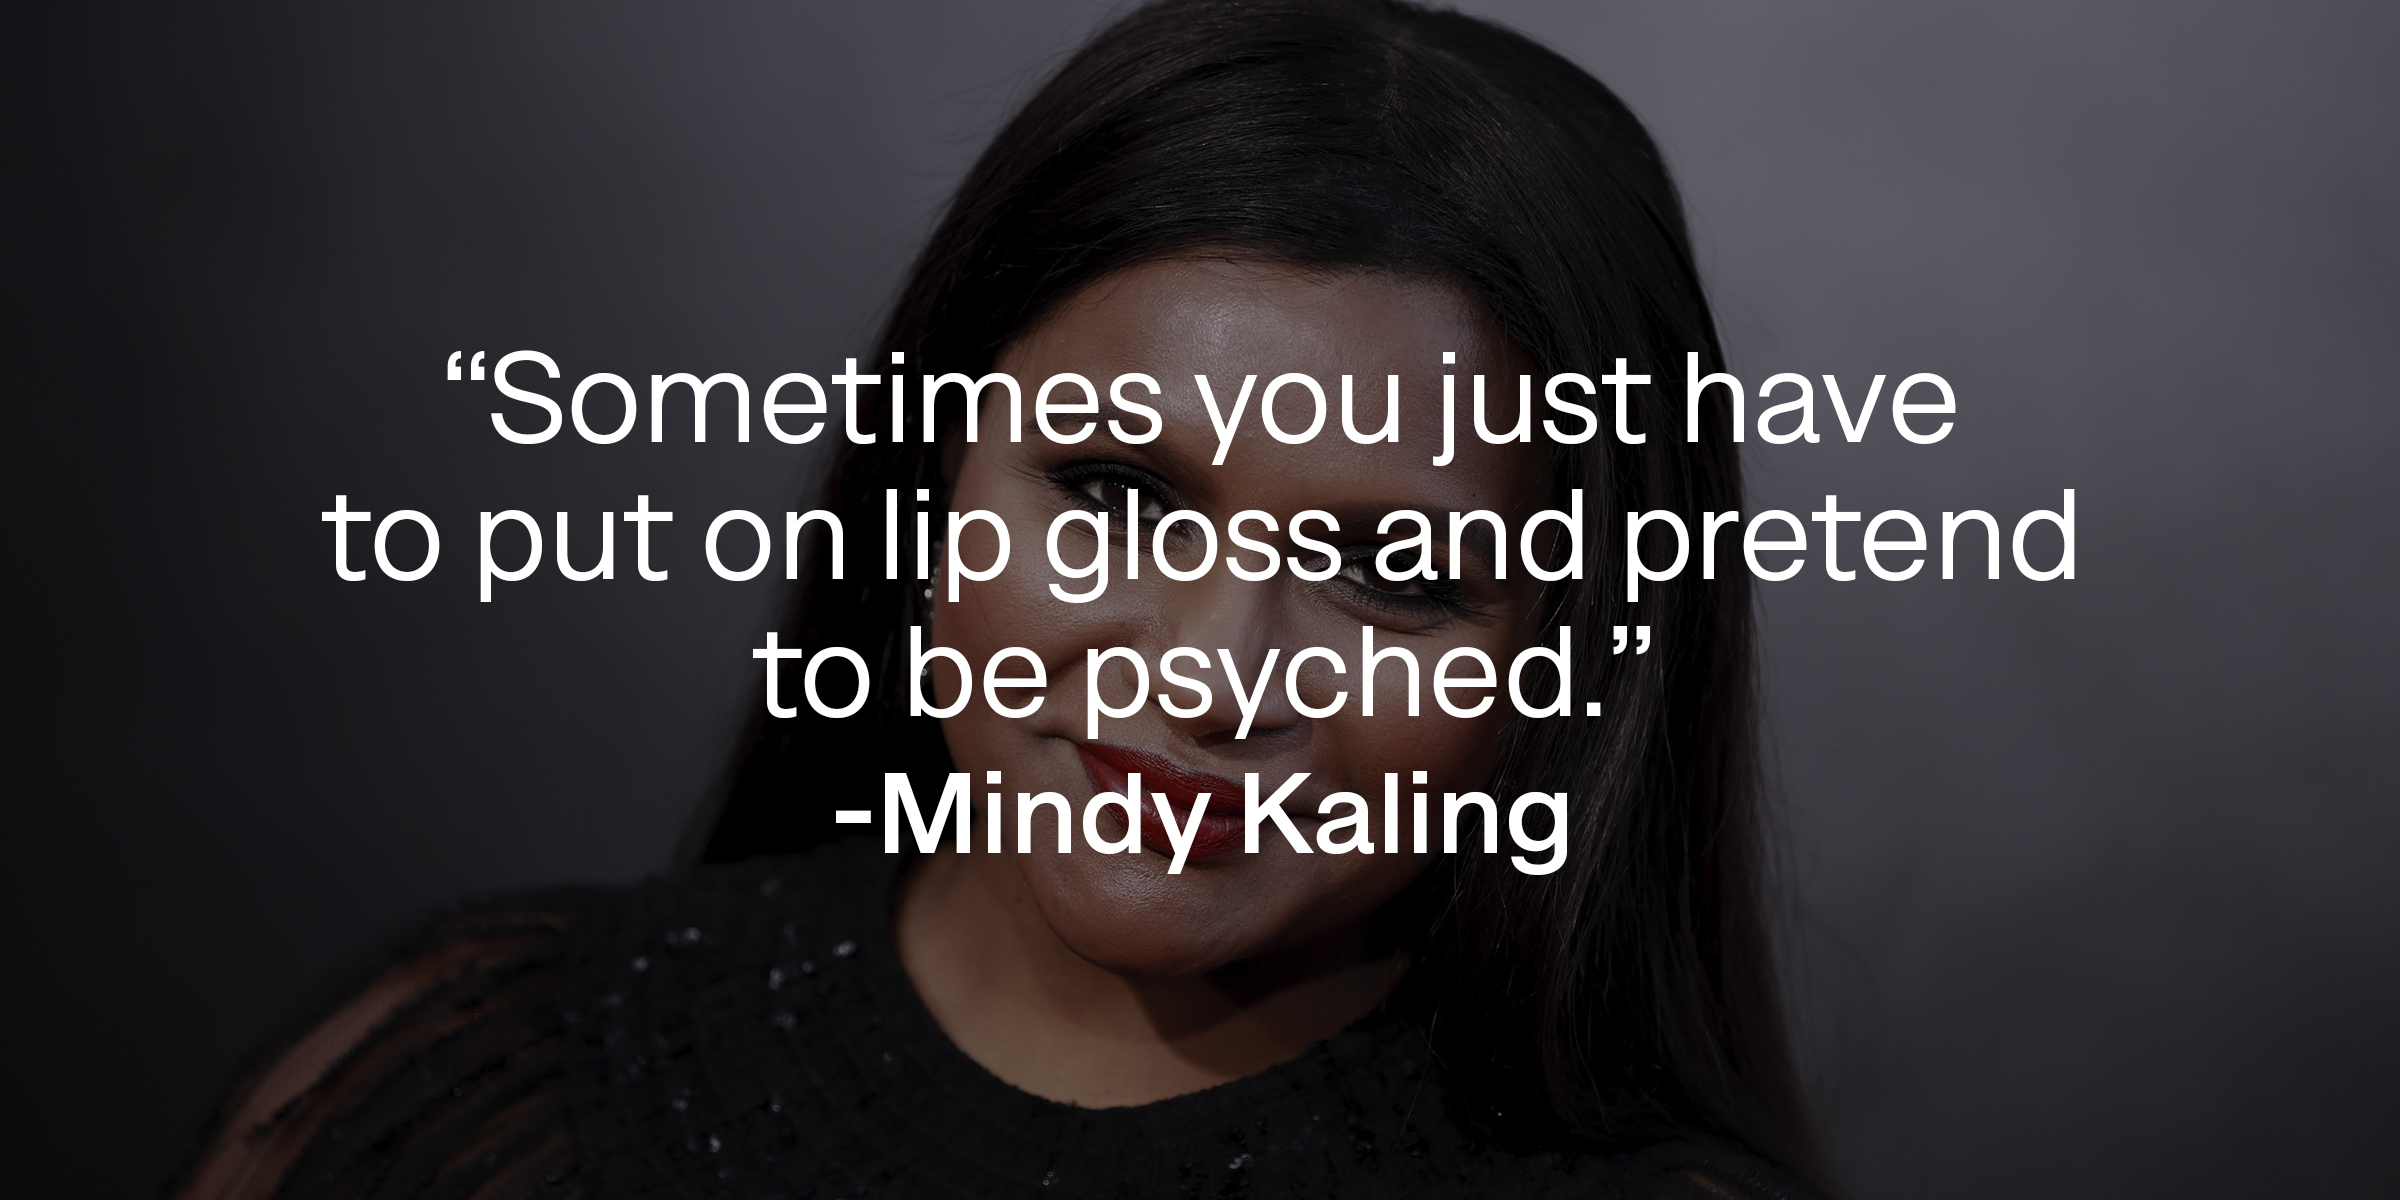 A photo of Mindy Kaling with her quote: "Sometimes you just have to put on lip gloss and pretend to be psyched." | Source: Getty Images